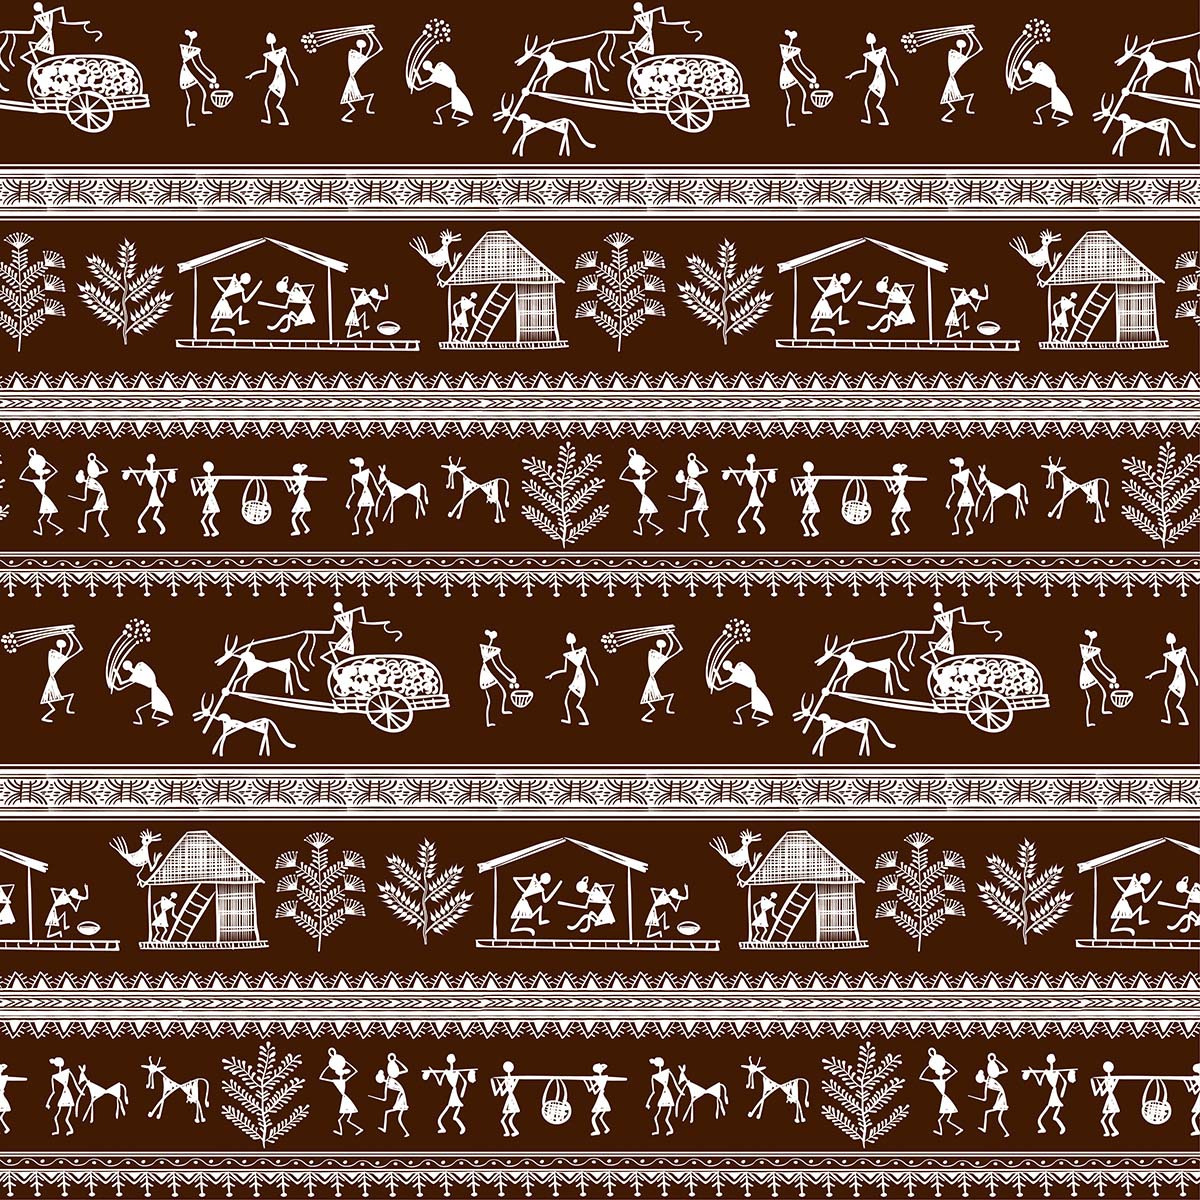 A brown and white pattern with people and animals